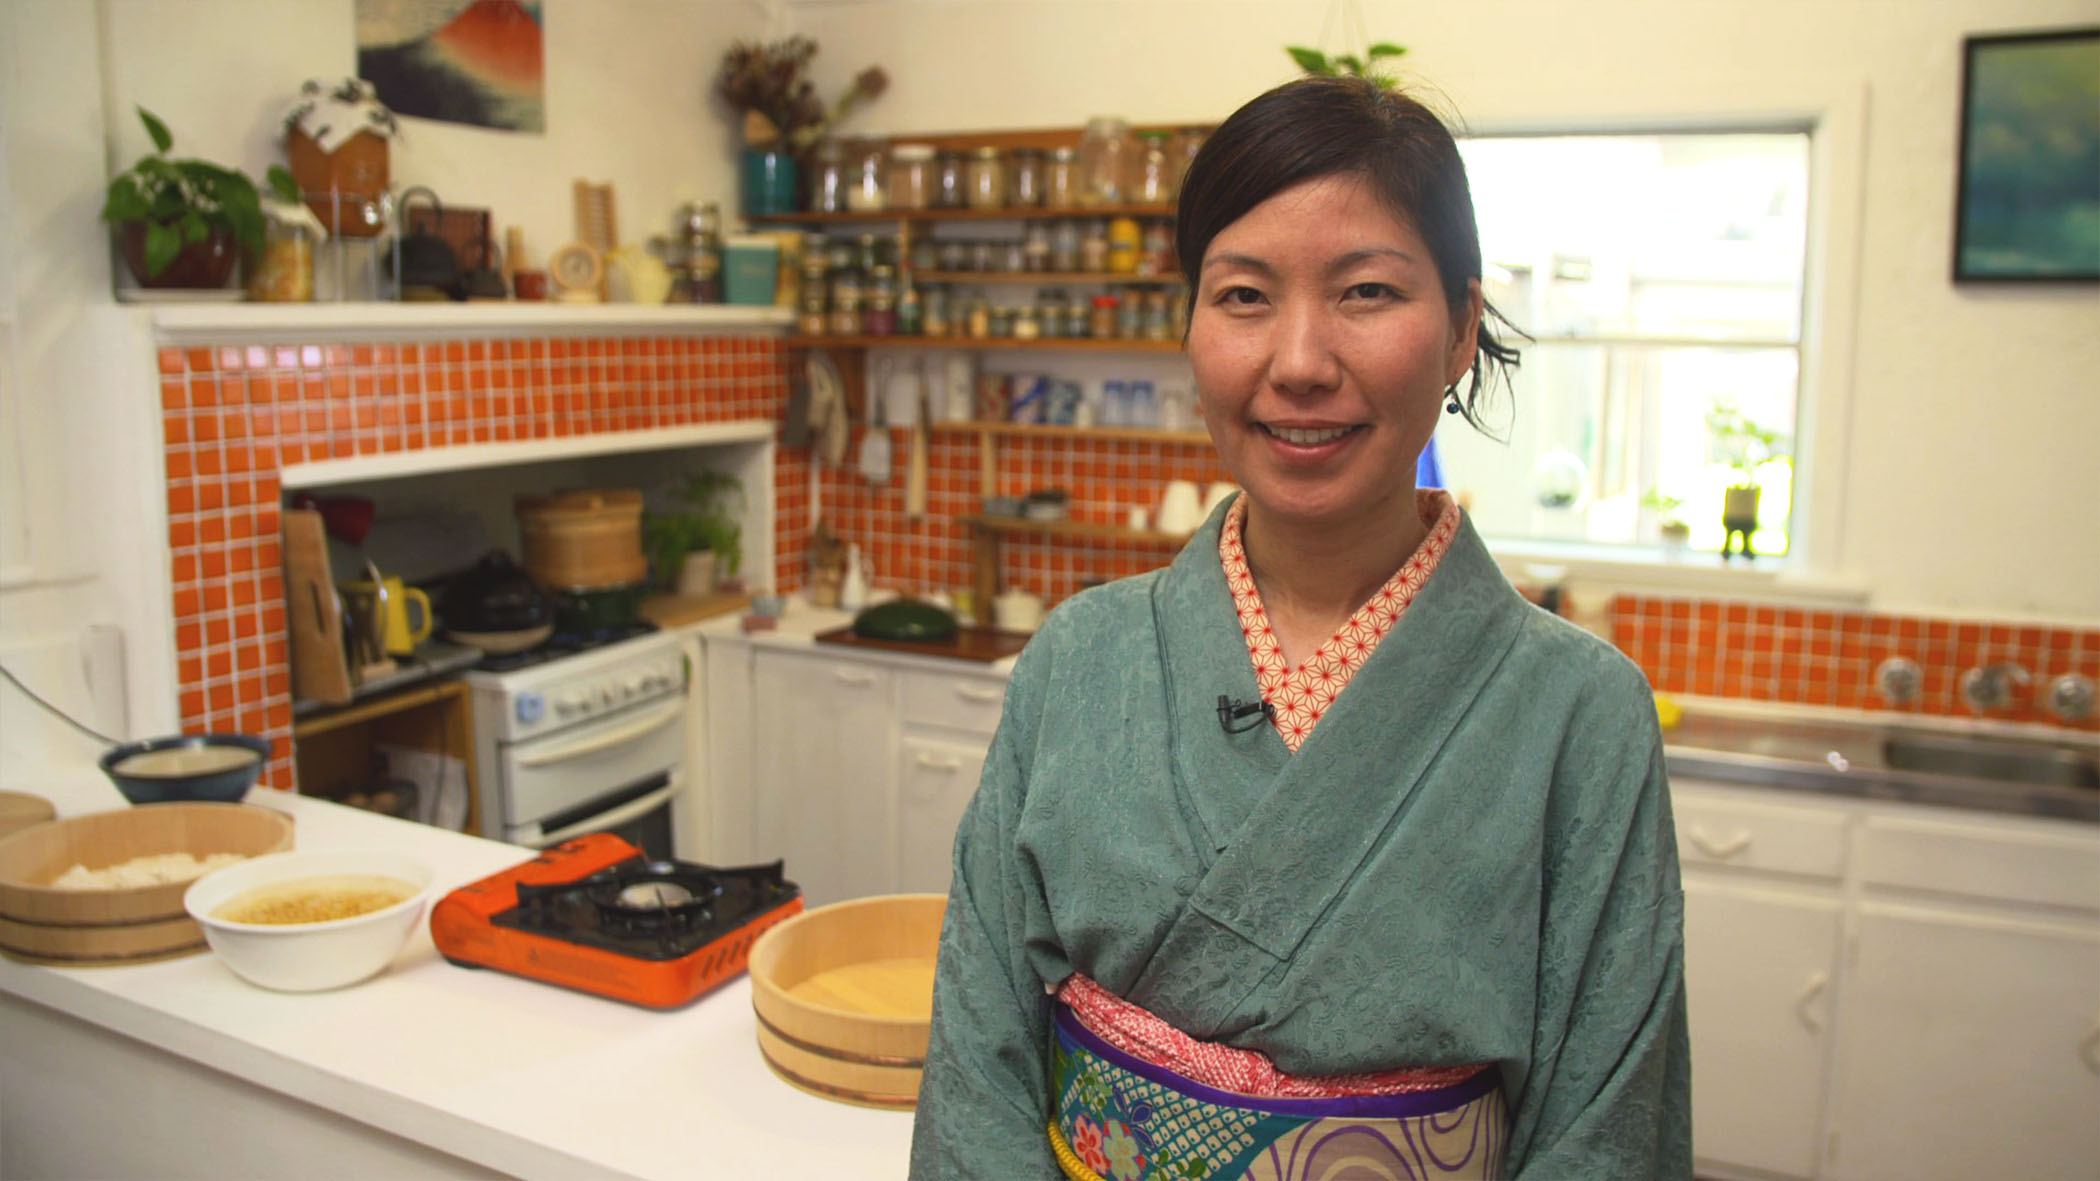 Yoko now offers traditional Japanese cooking lessons.